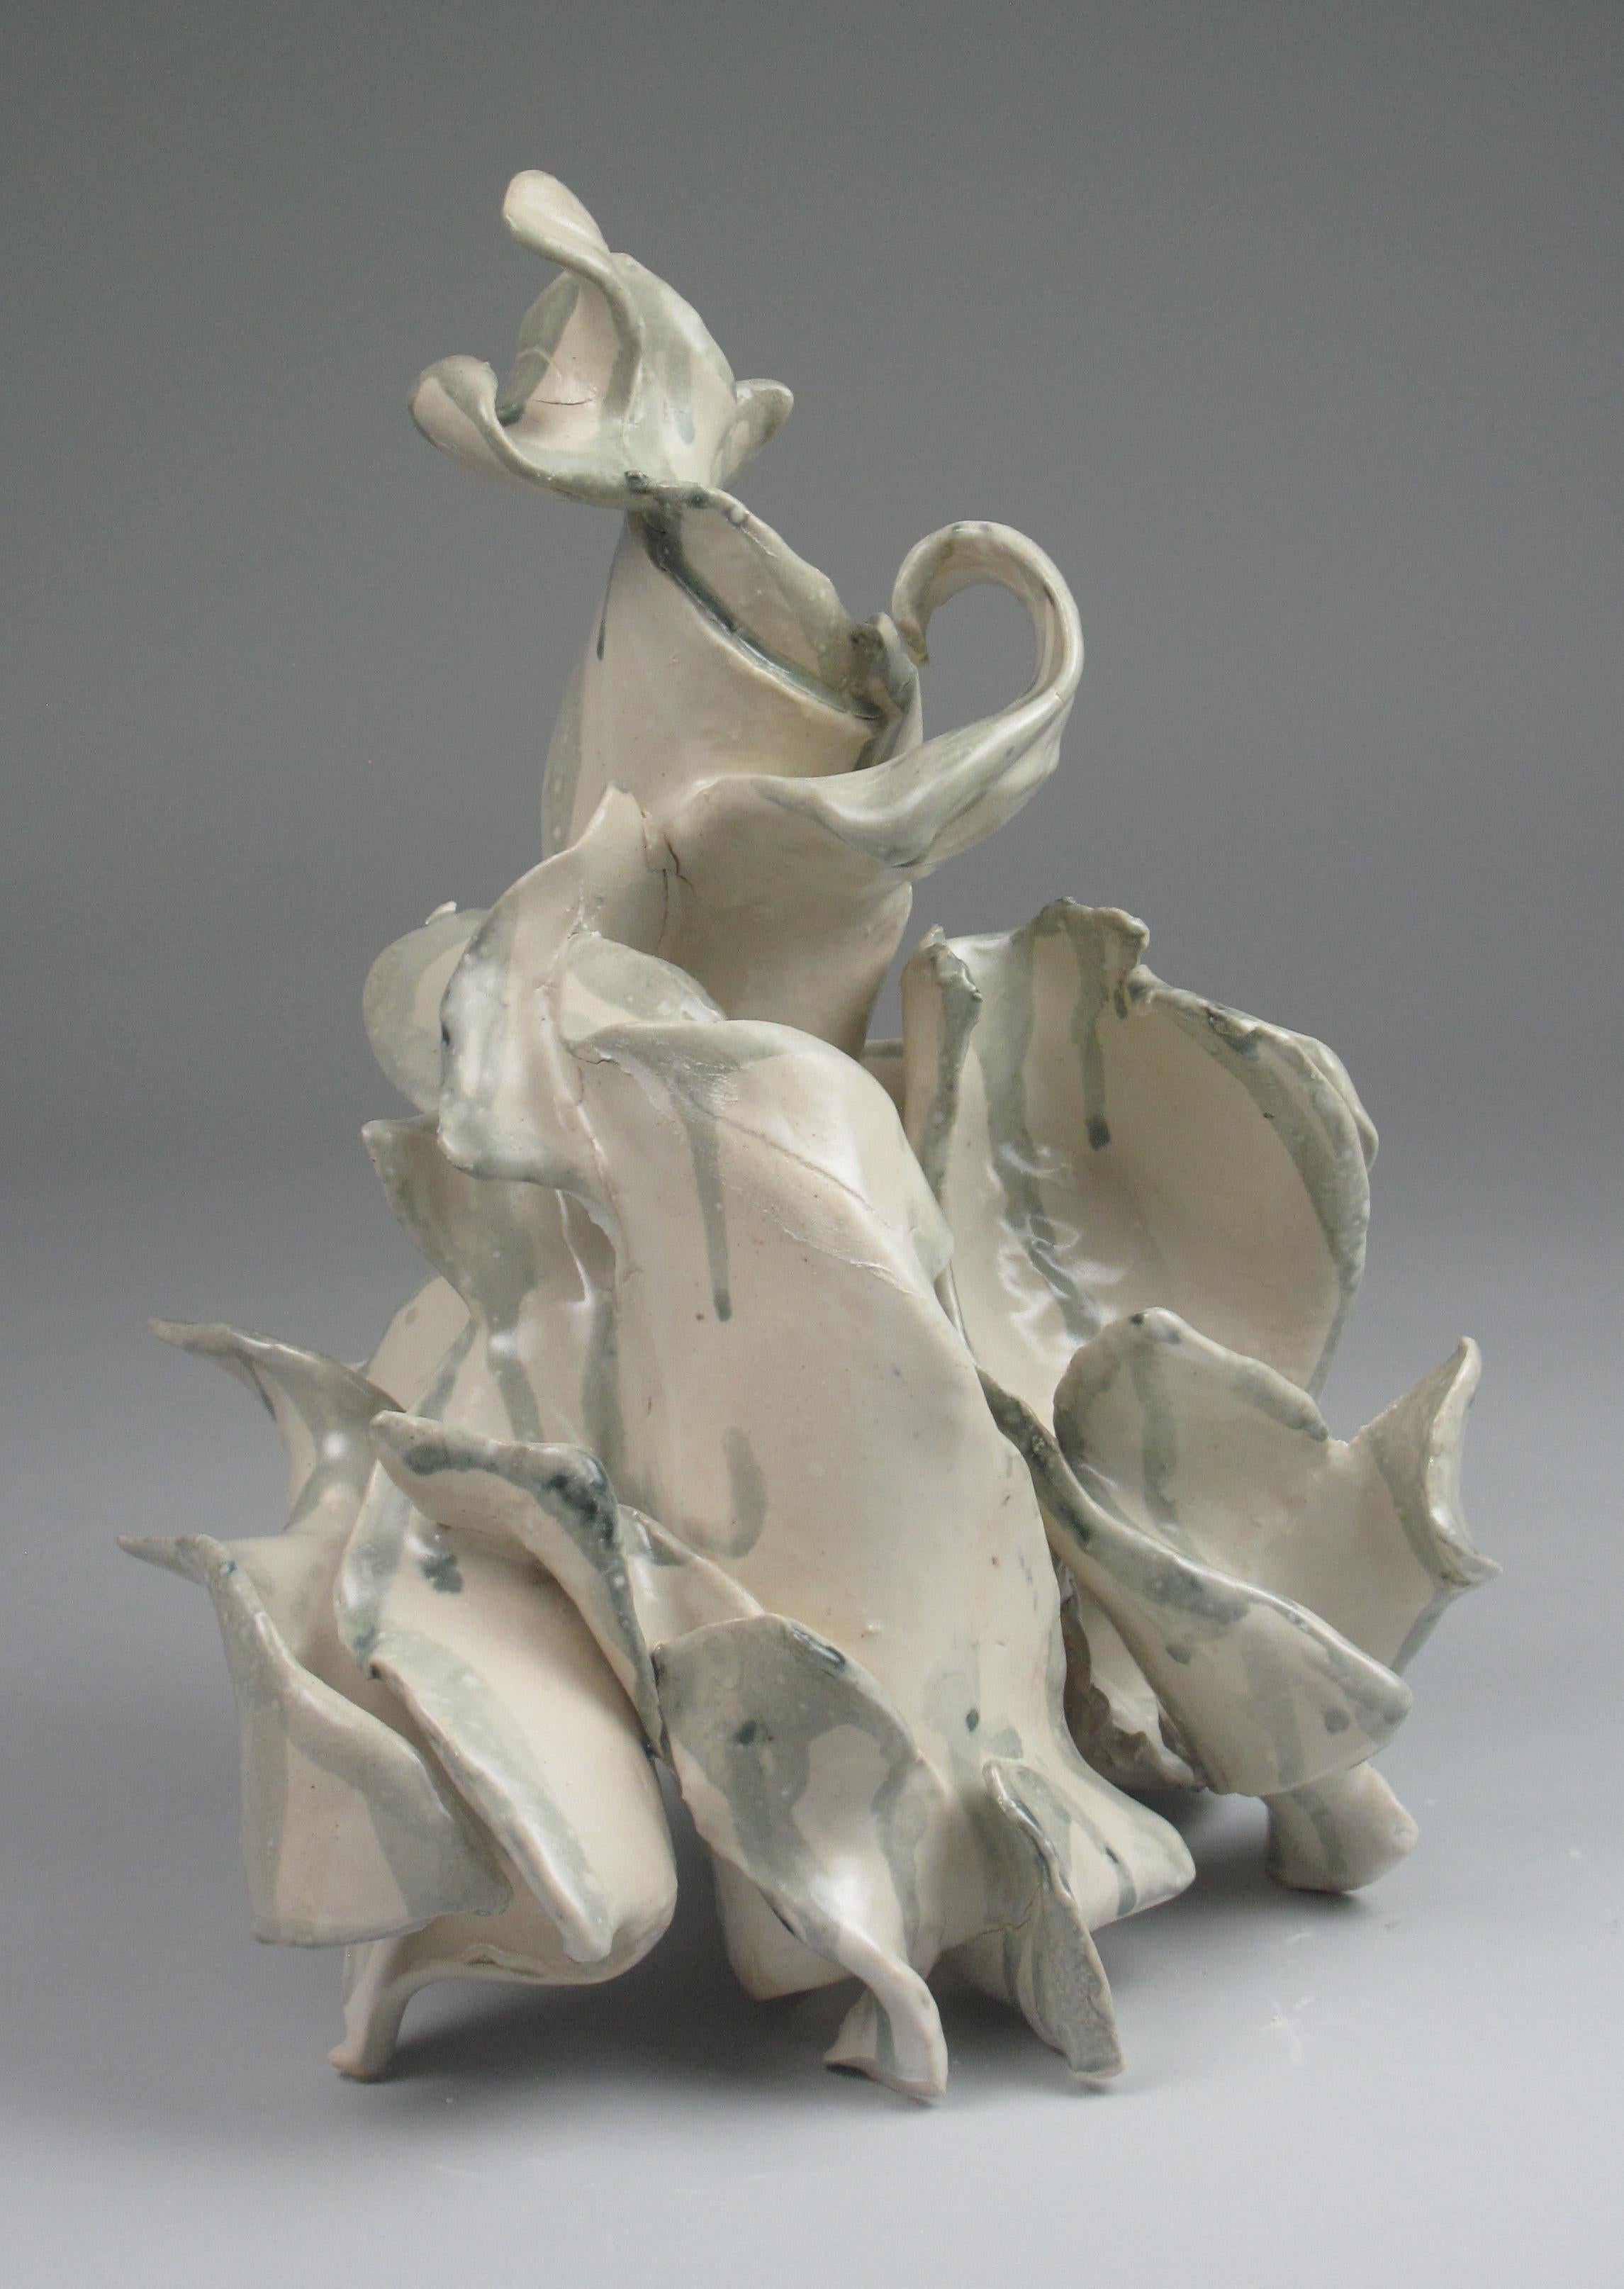 abstract ceramic sculpture